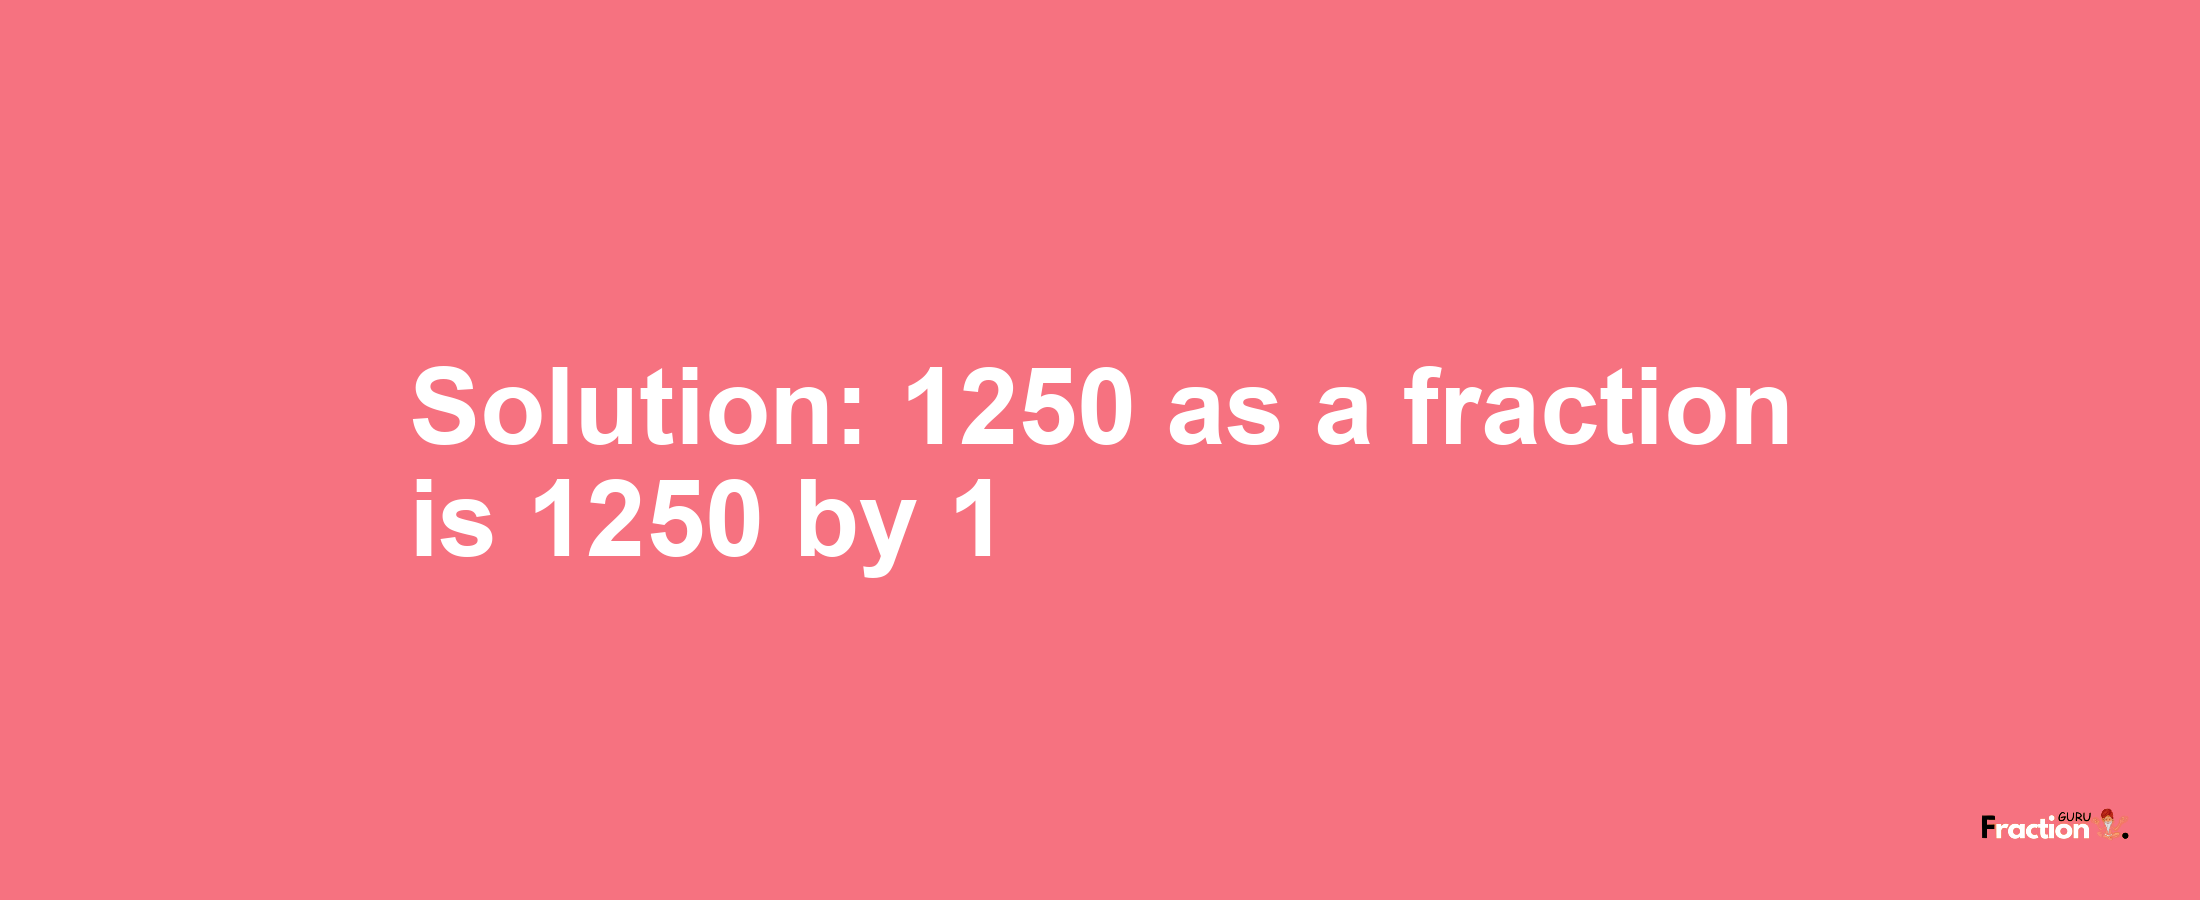 Solution:1250 as a fraction is 1250/1